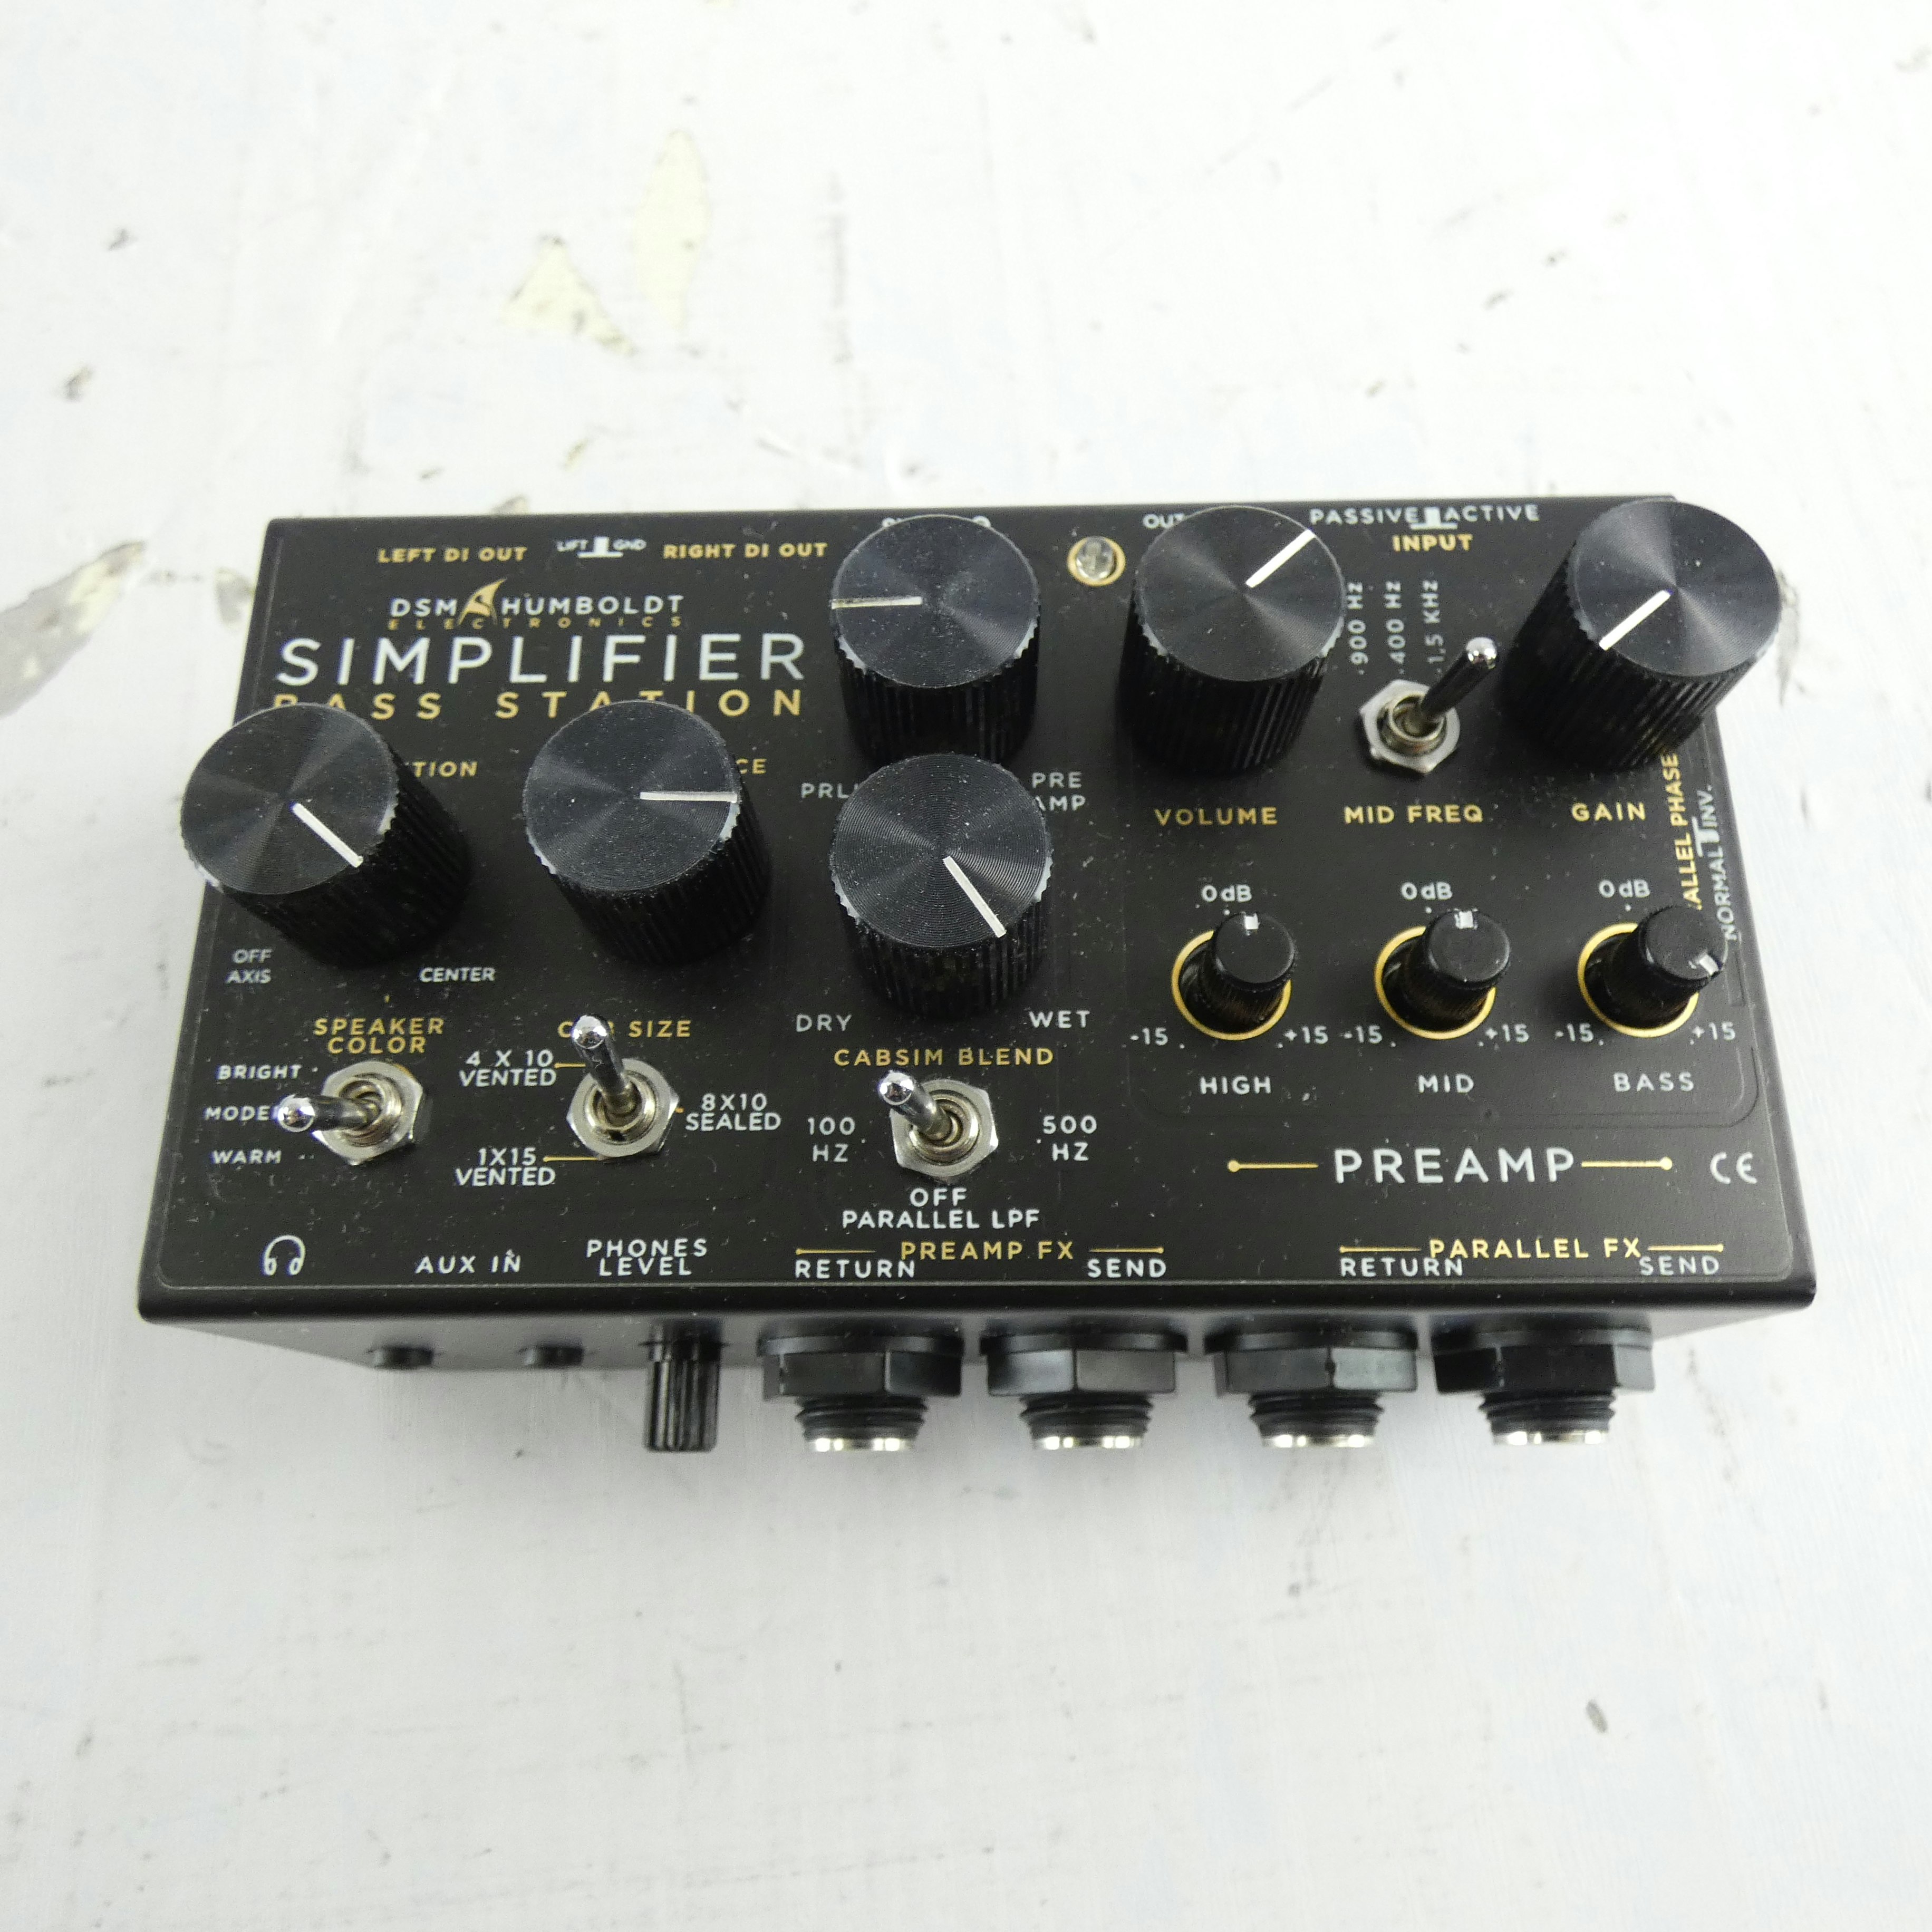 Used DSM/HUMBOLDT SIMPLIFIER BASS STATION Guitar Effects Other Guitar  Effects